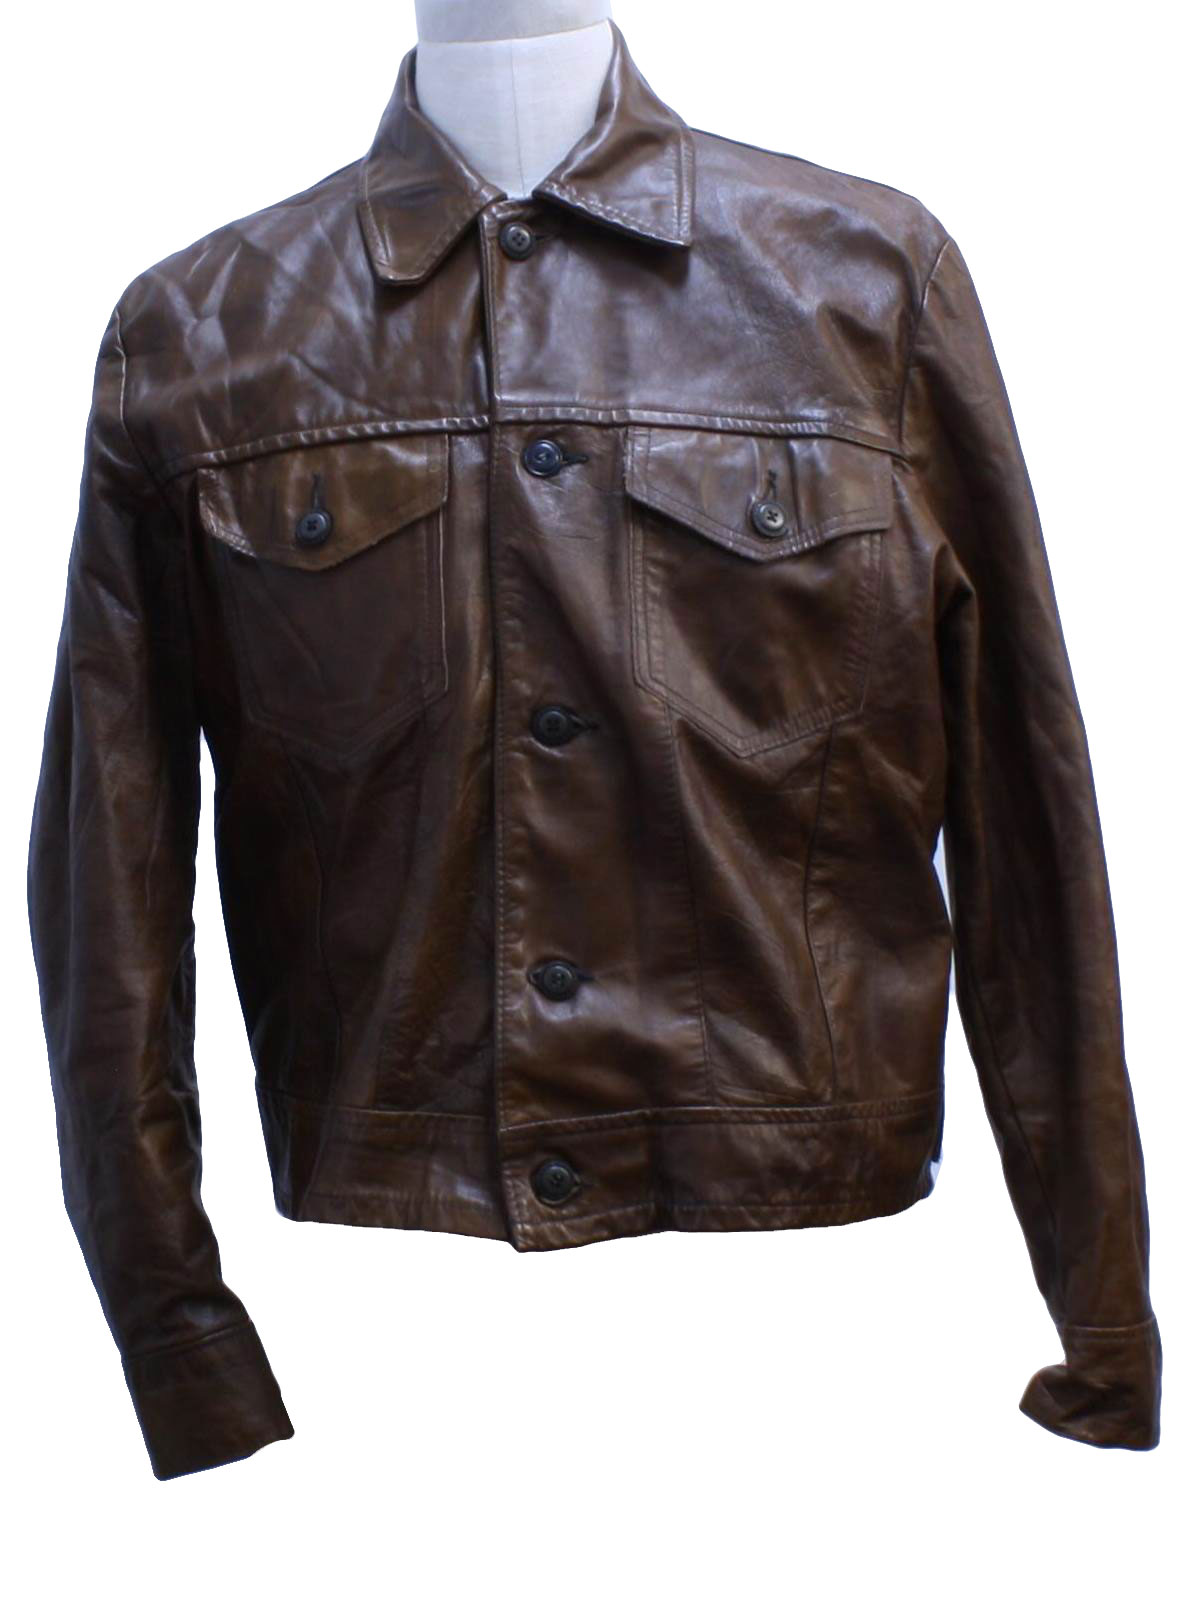 Retro 1960's Leather Jacket (Its a Holiday) : 60s -Its a Holiday- Mens ...